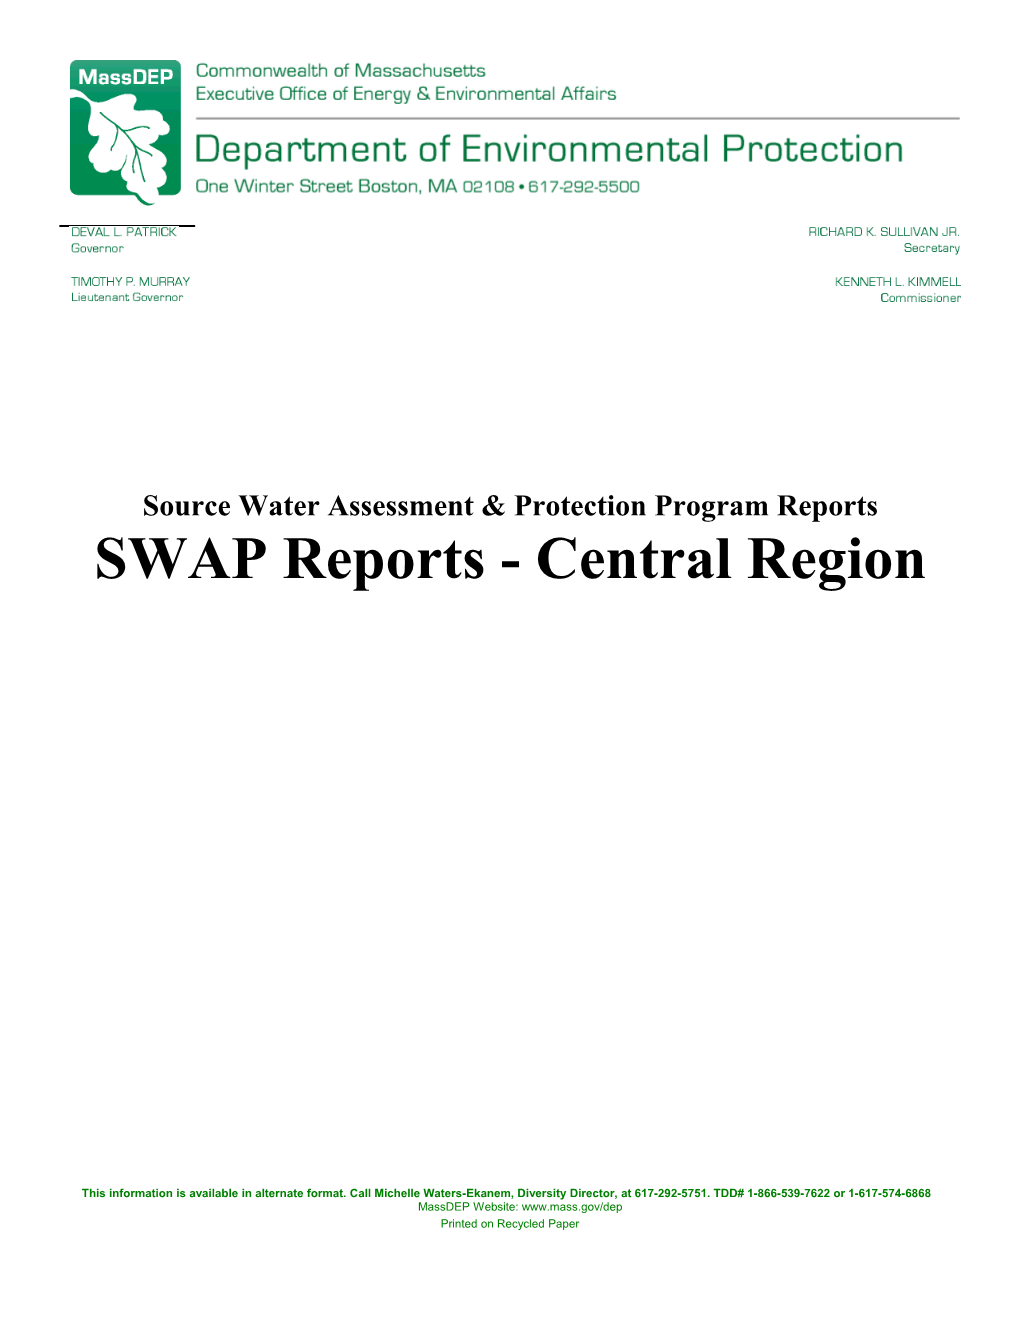 Source Water Assessment & Protection Program Reports